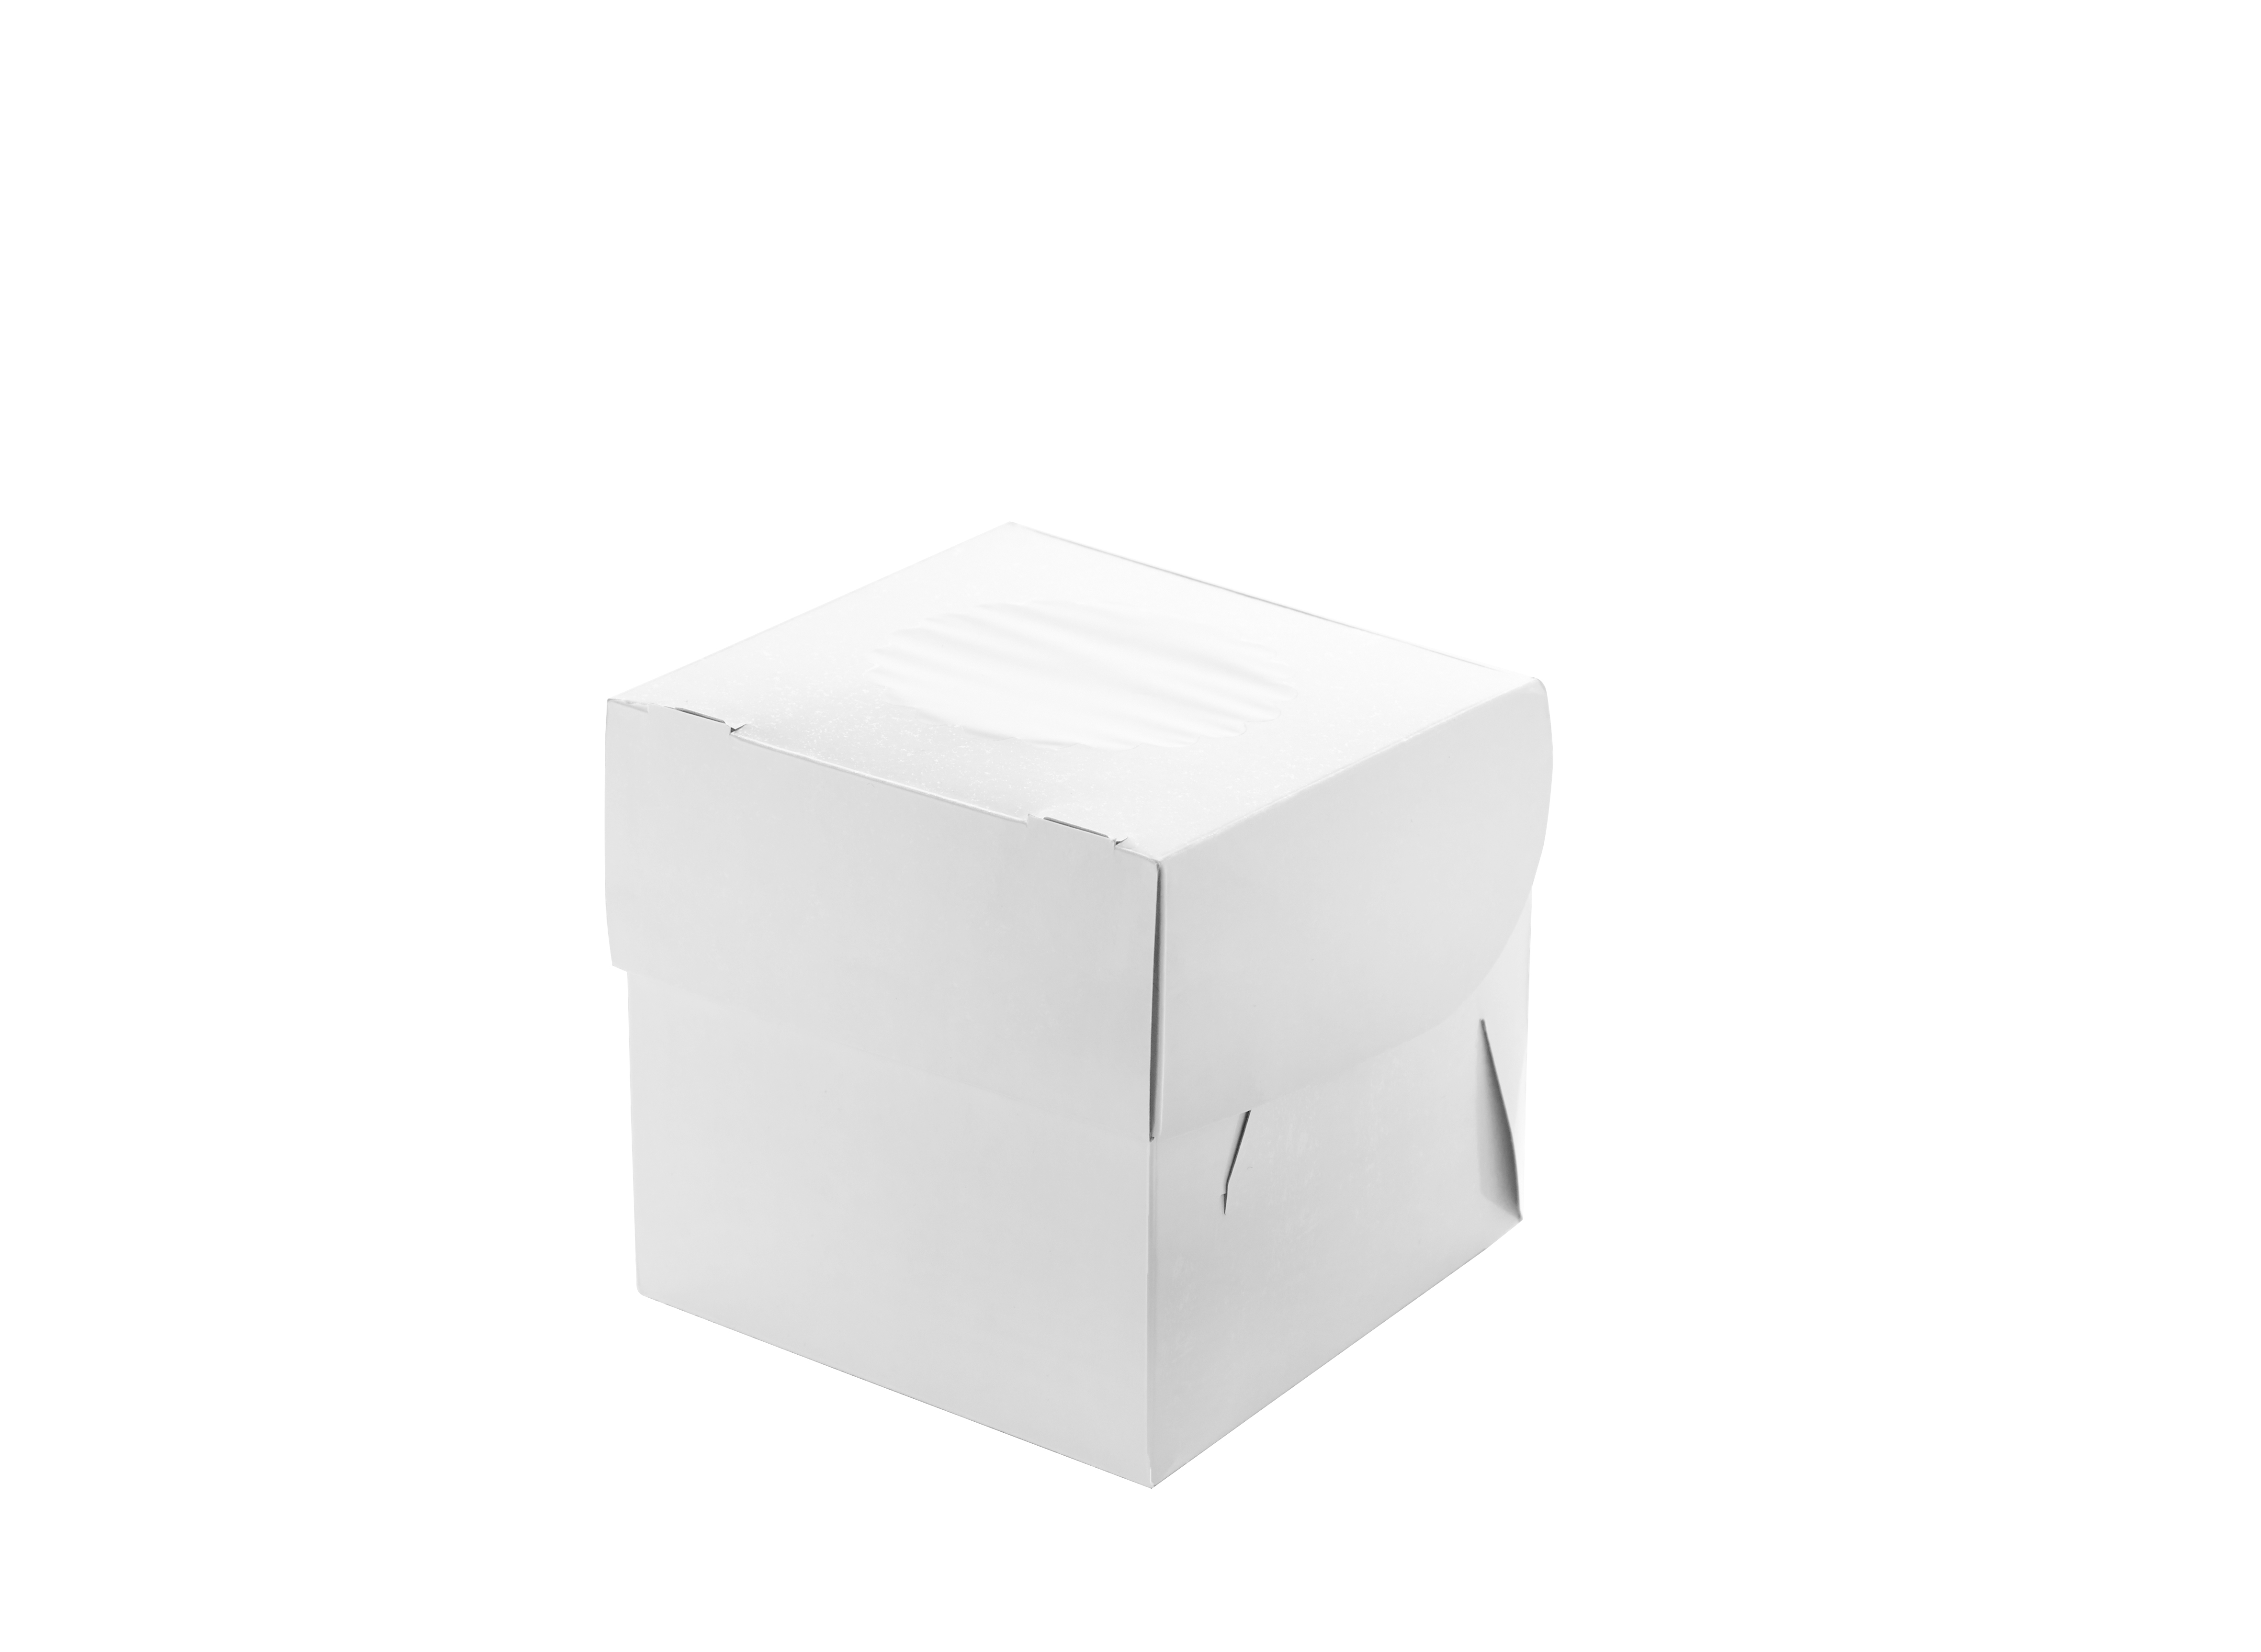 OSQ MUF 2 boxes for muffins